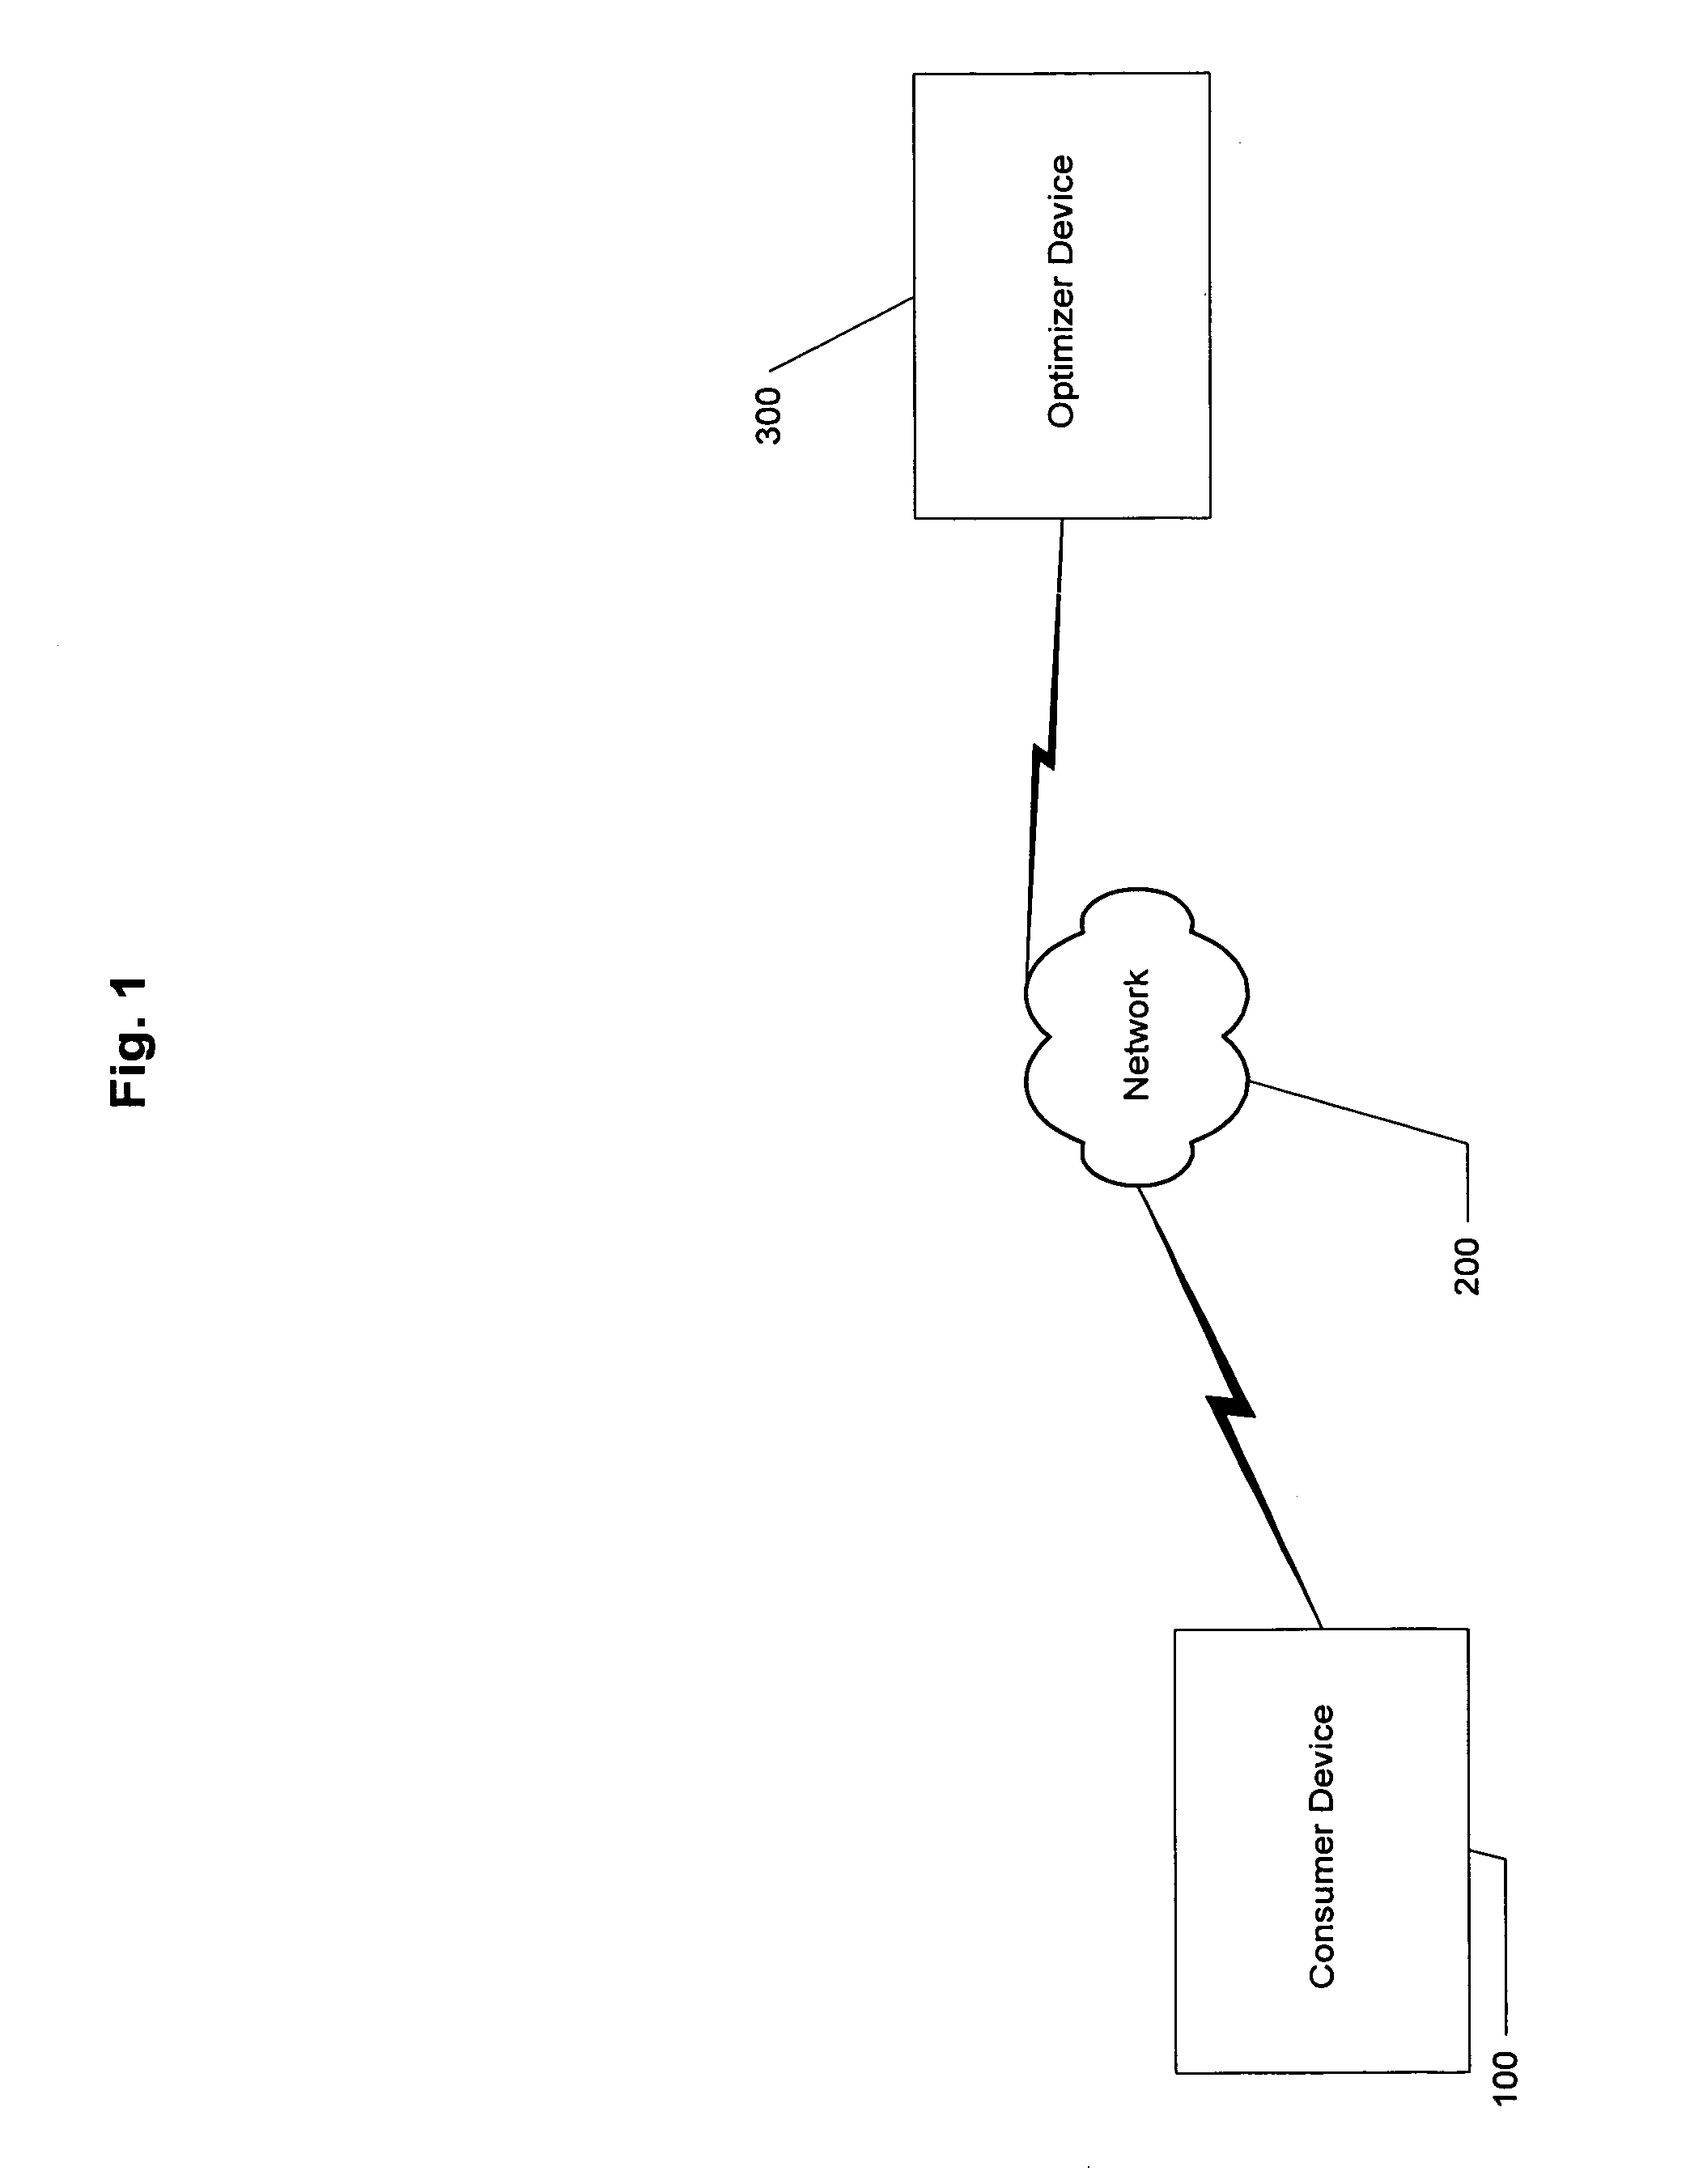 System and method for assisting customers in choosing a bundled set of commodities using customer preferences